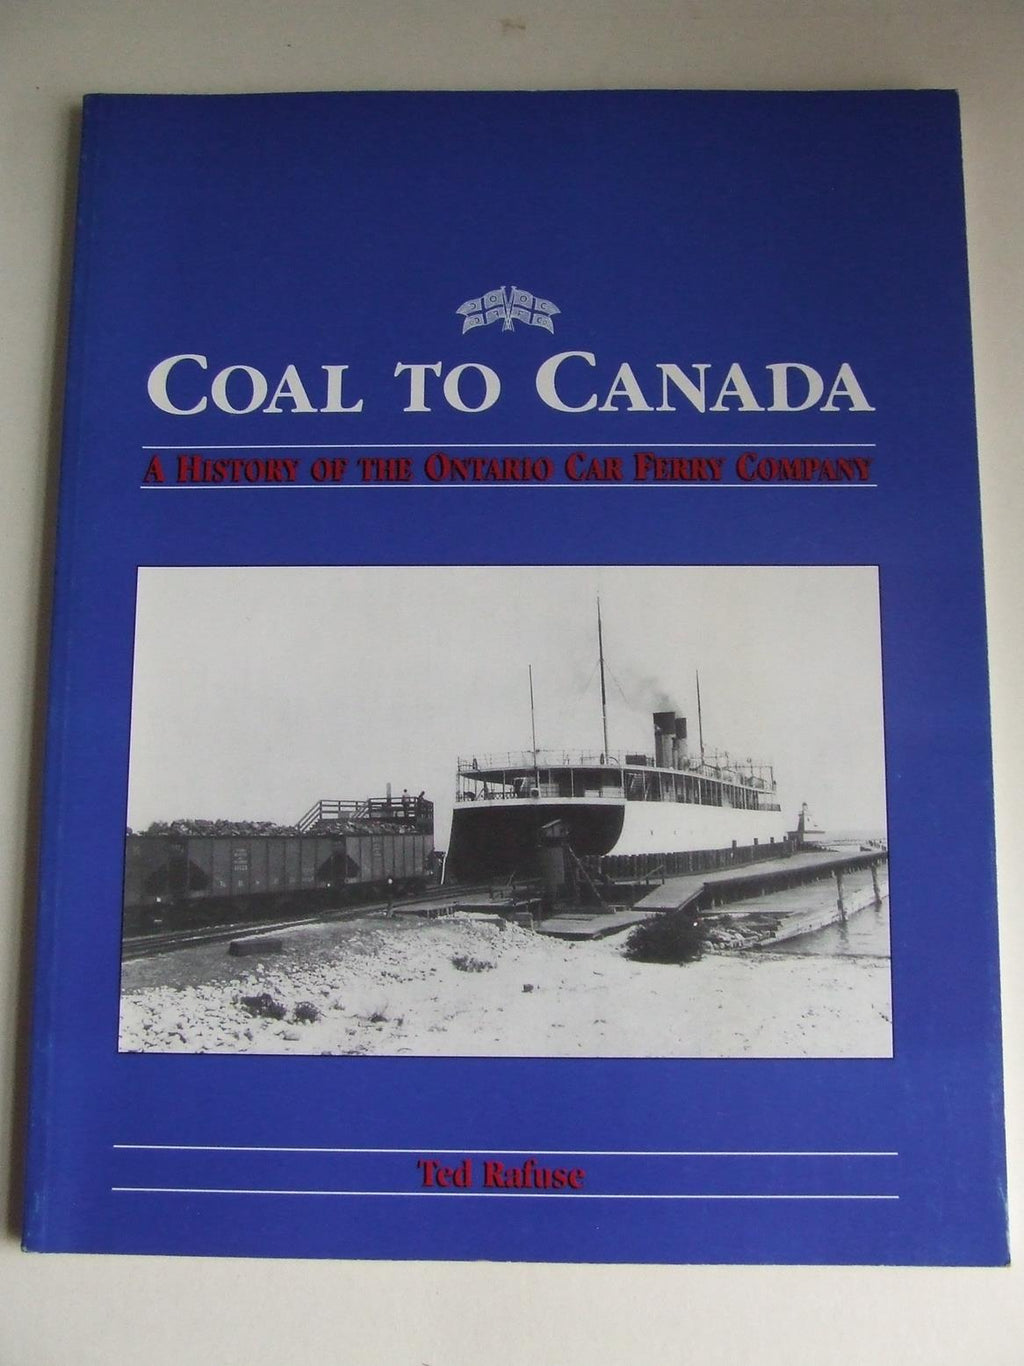 Coal to Canada, a history of the Ontario Car Ferry Company